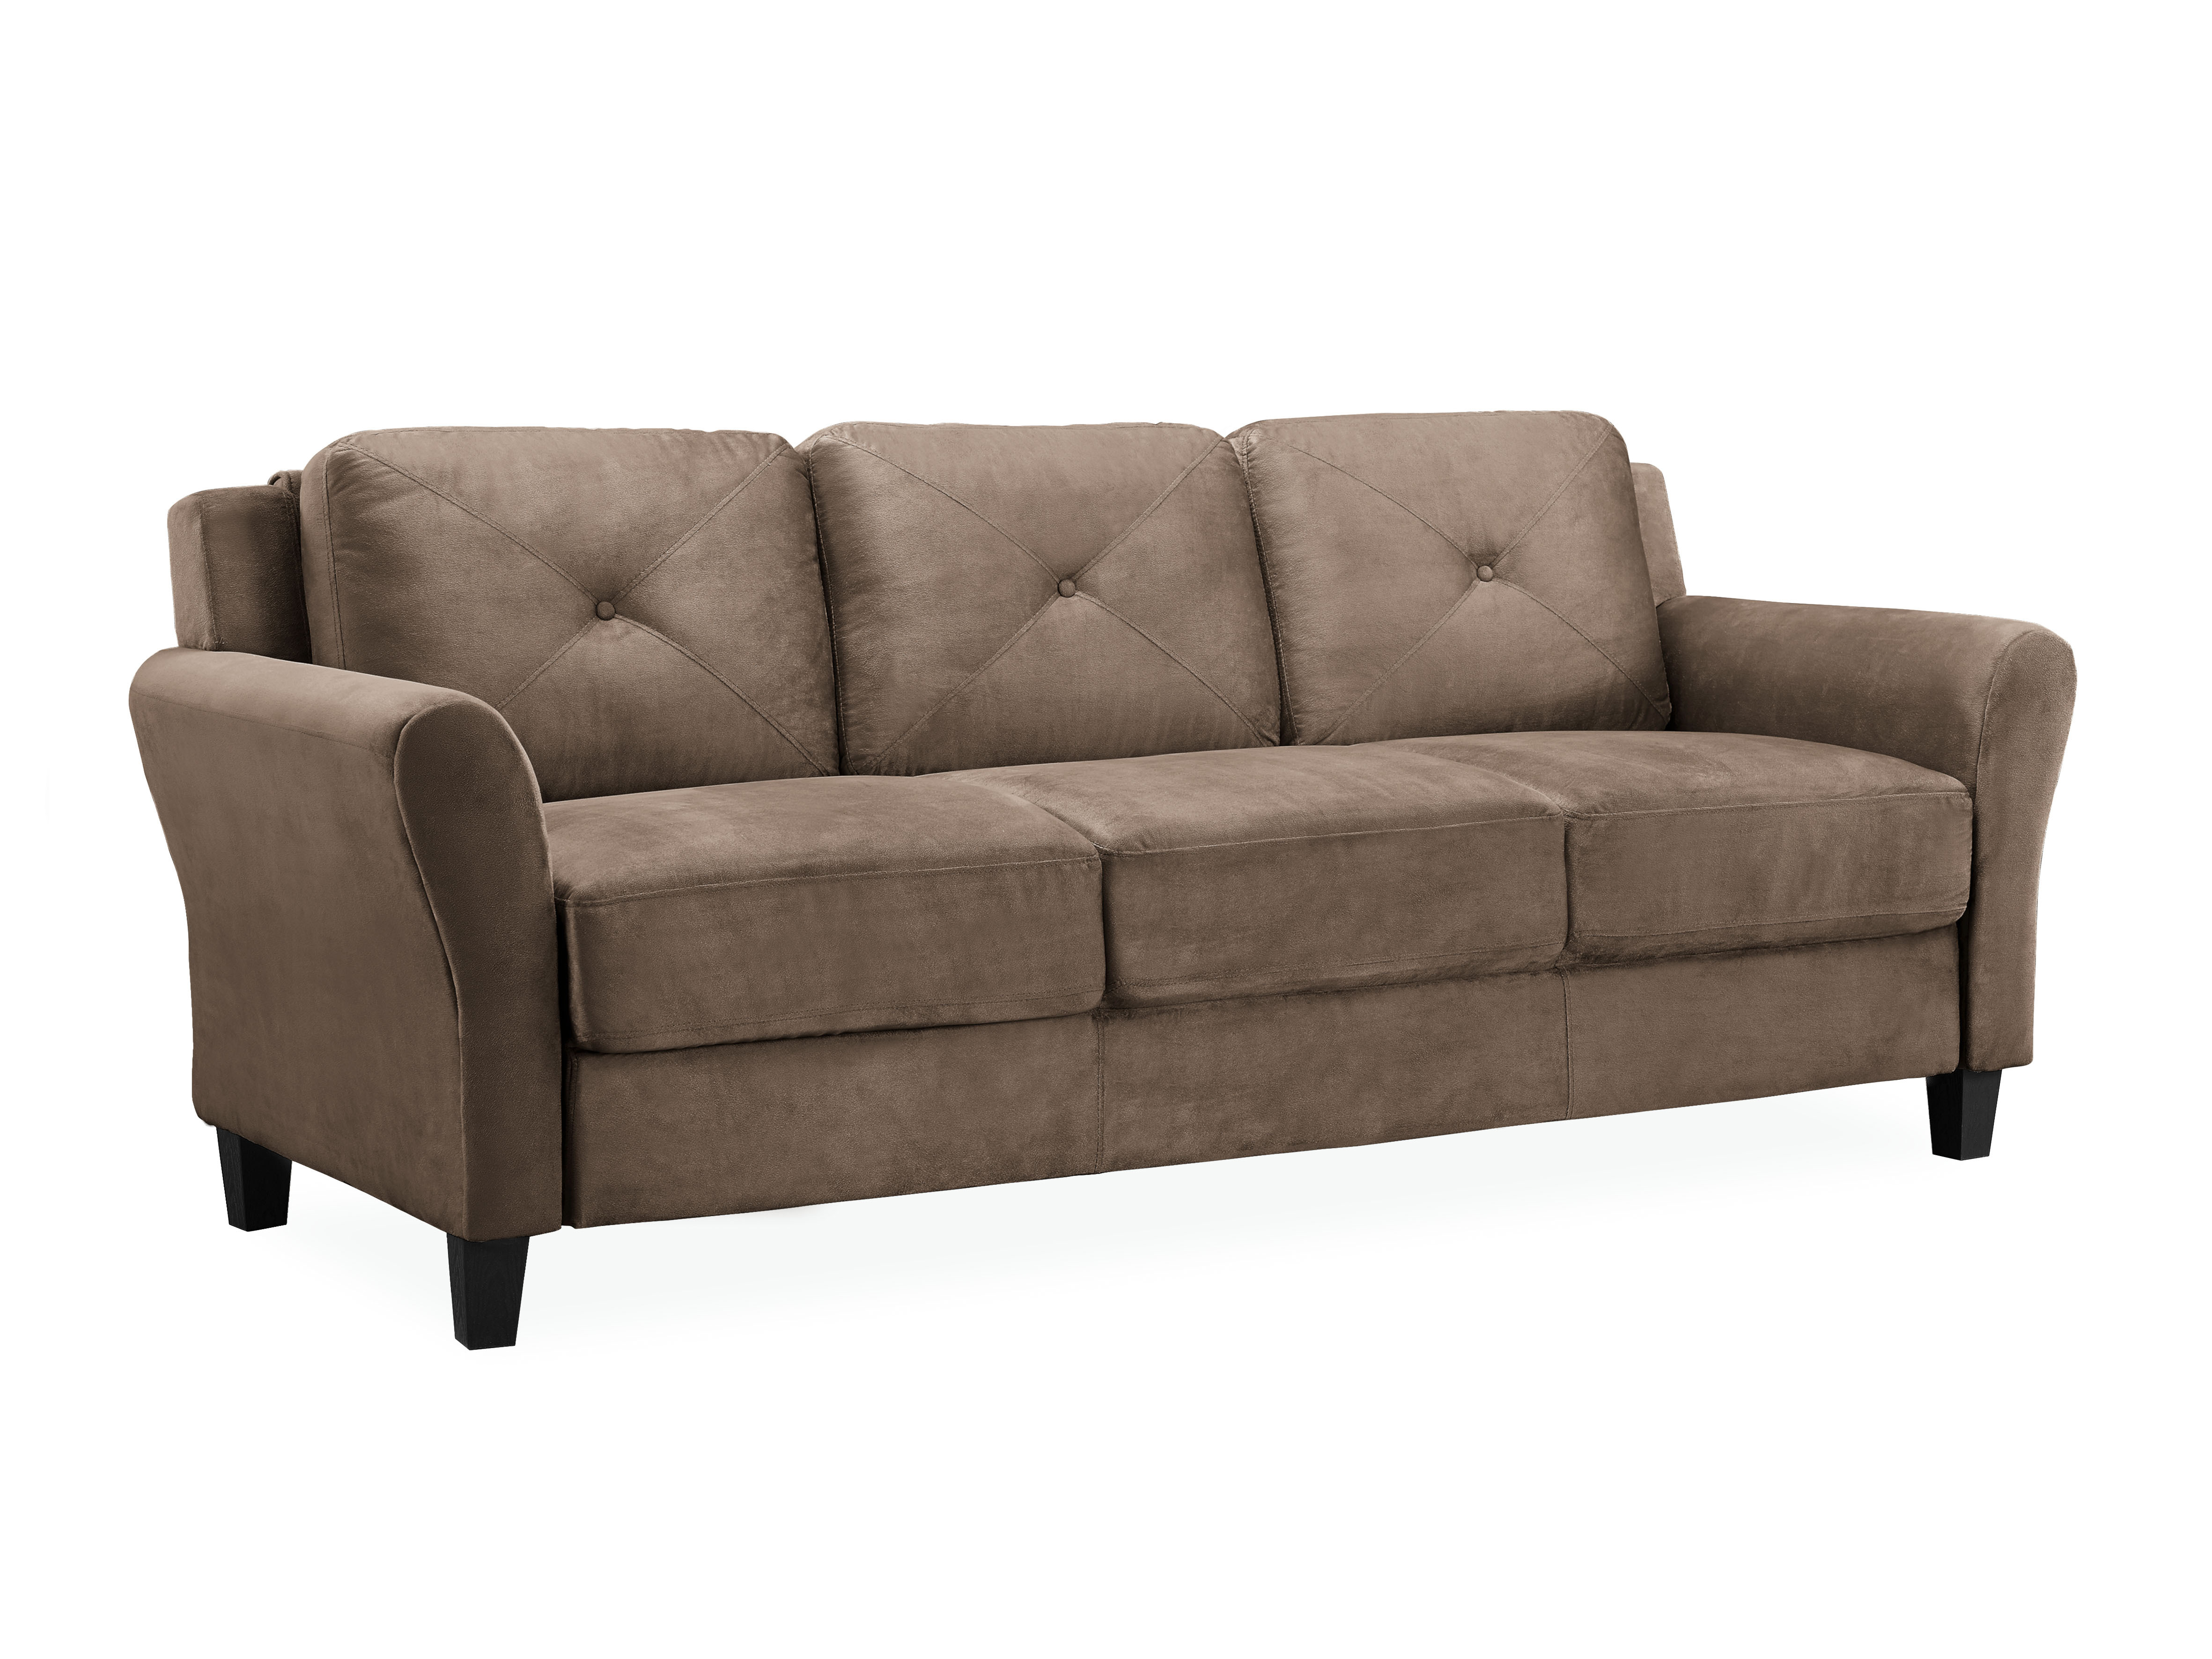 Lifestyle Solutions Taryn Traditional Sofa with Rolled Arms, Brown Fabric - image 1 of 12